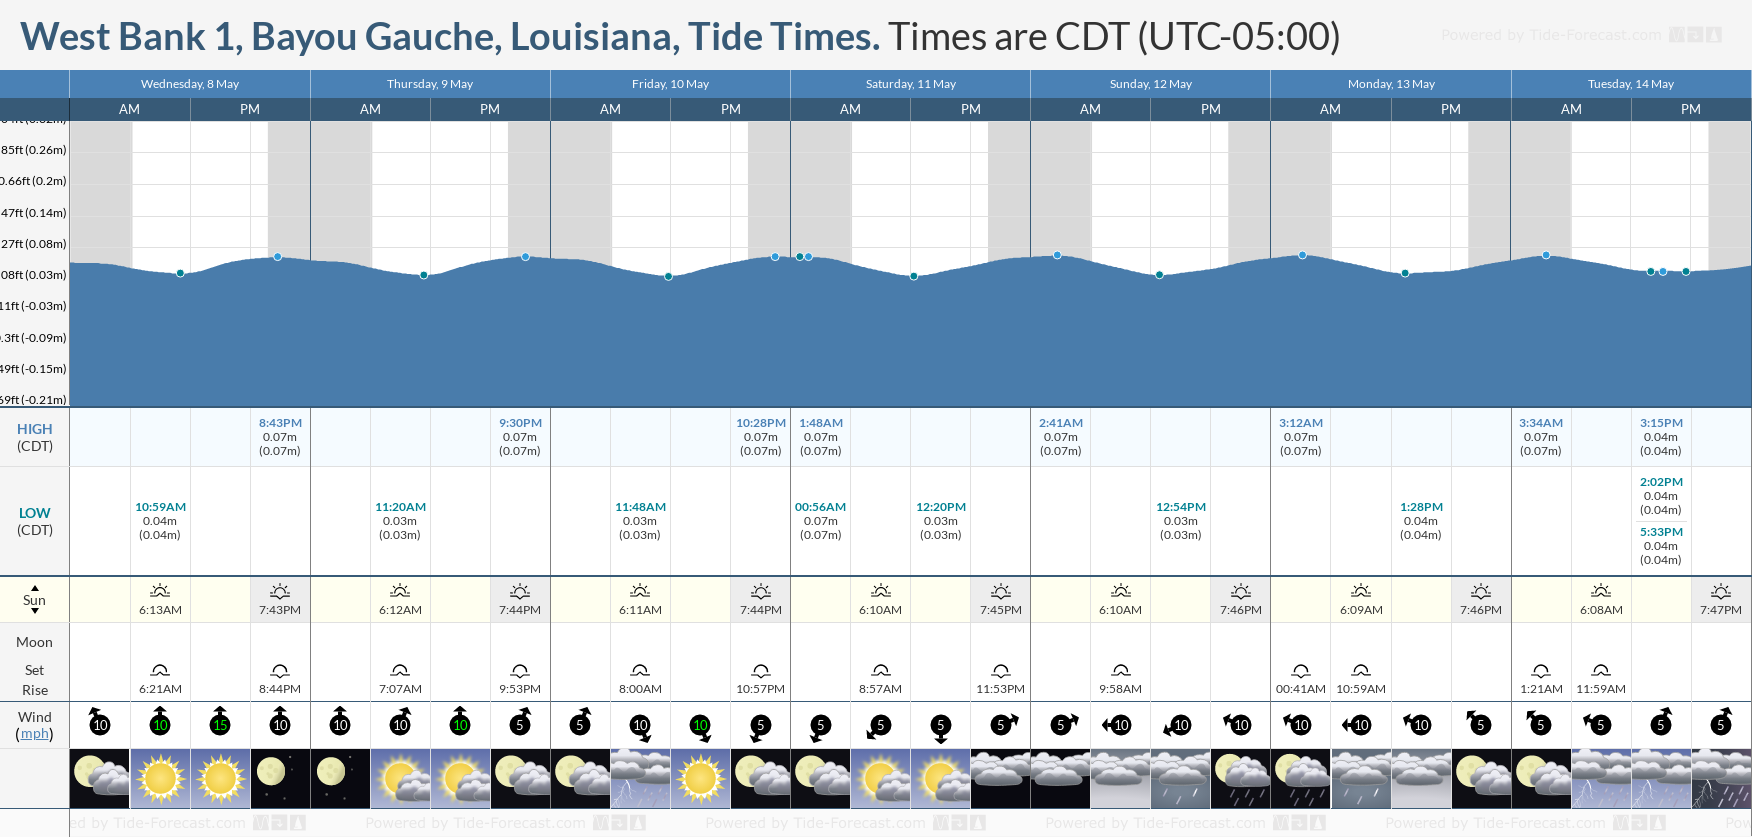 West Bank 1, Bayou Gauche, Louisiana Tide Chart including high and low tide tide times for the next 7 days